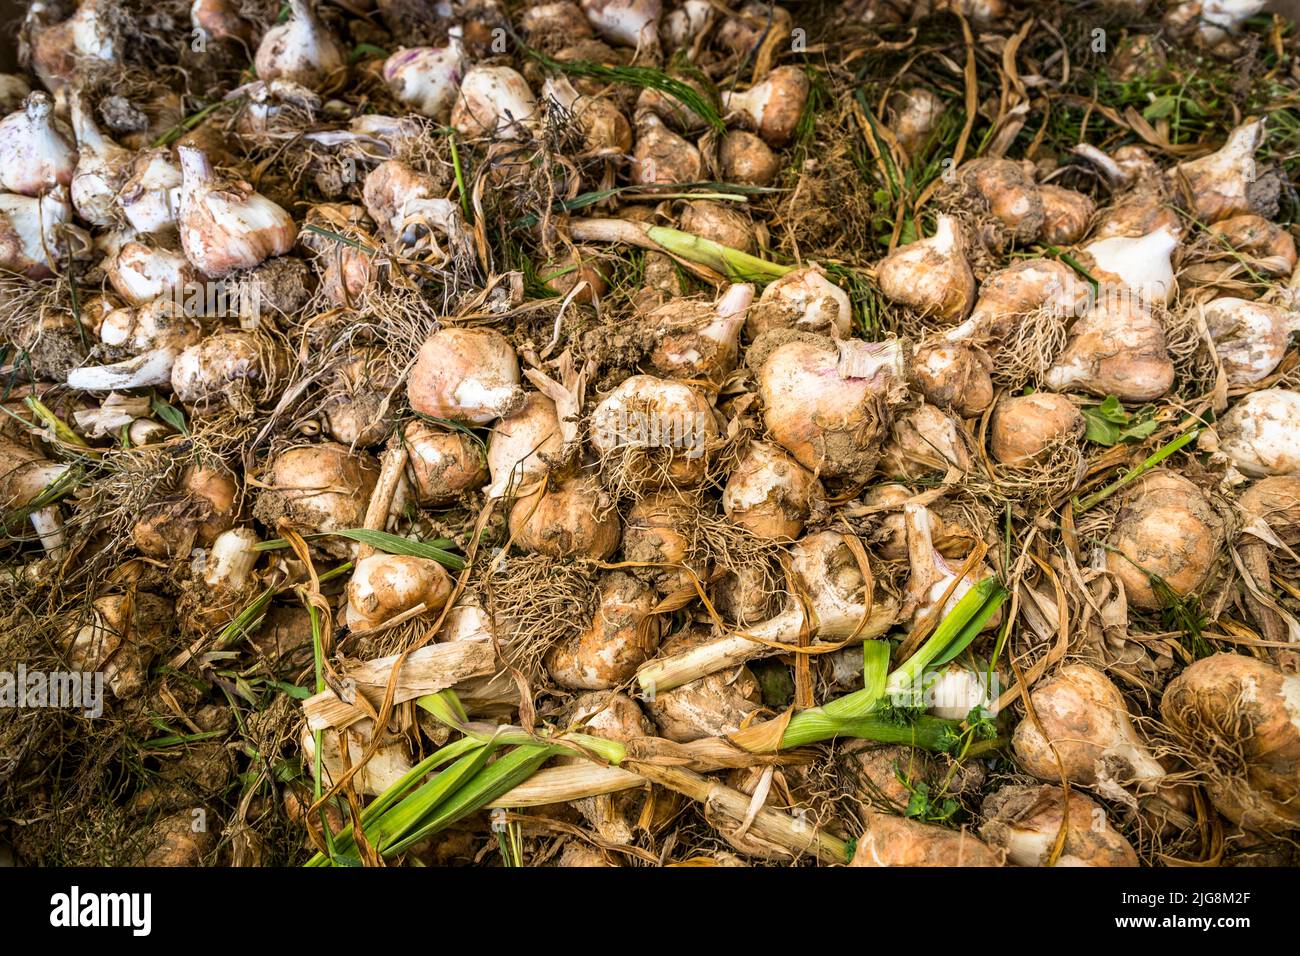 Production of Black Garlic in Die, France Stock Photo